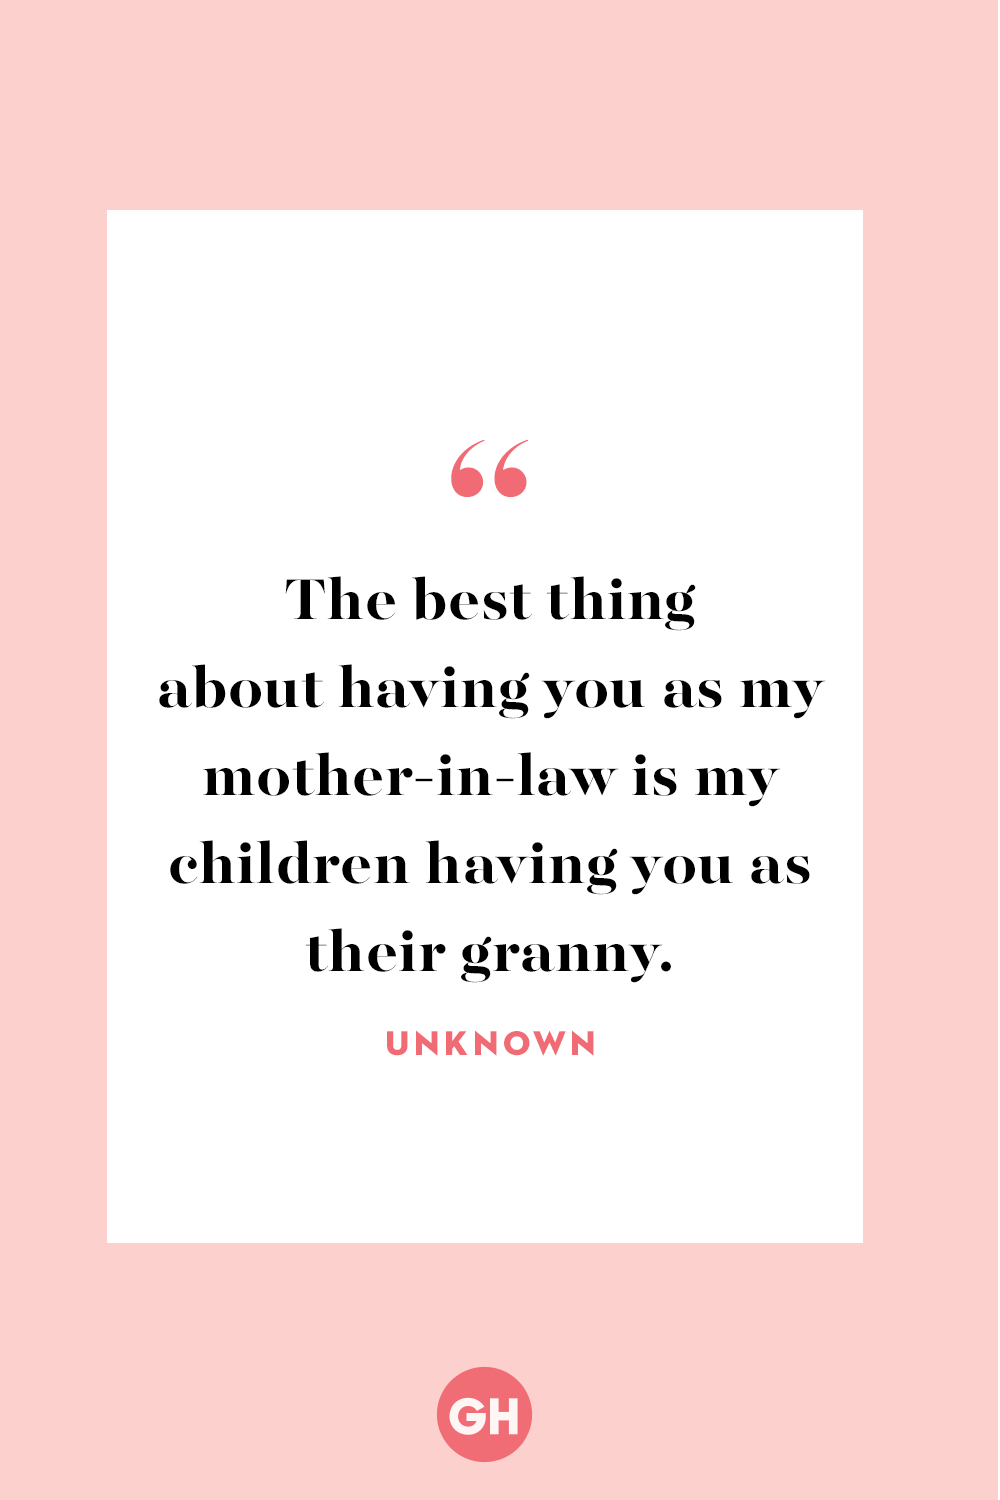 30 Best Mother-in-Law Quotes and Sayings